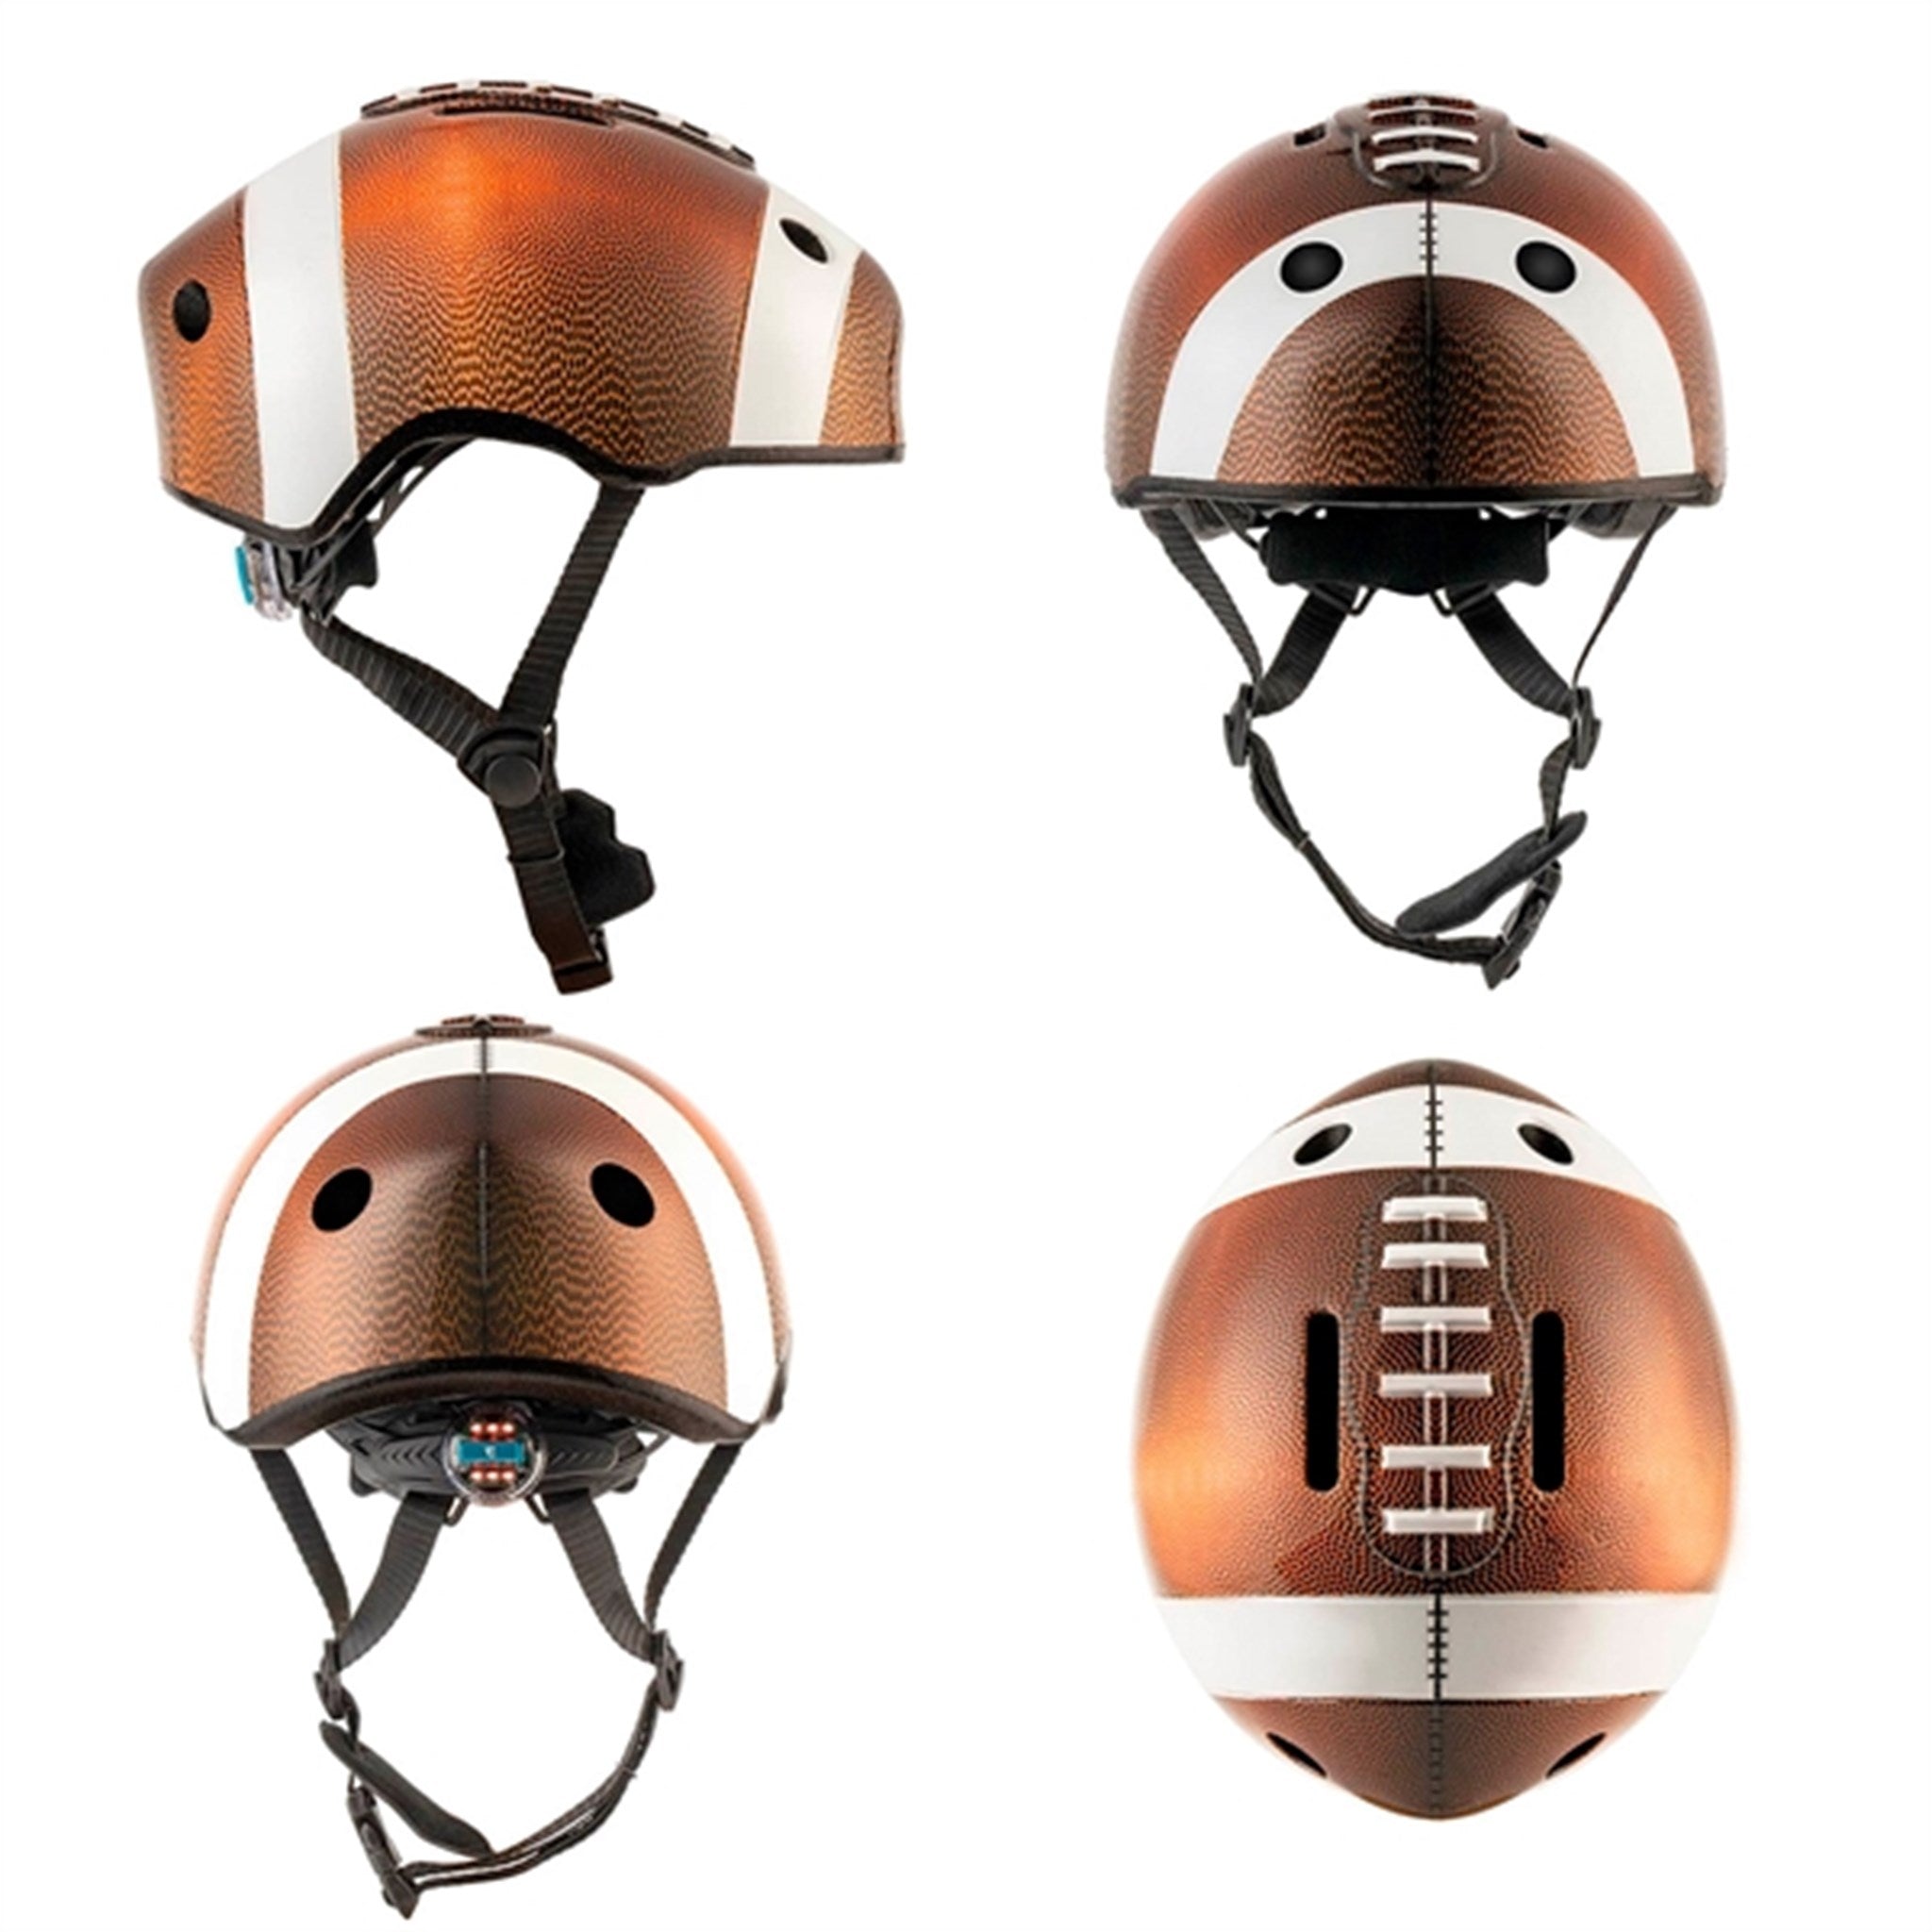 Crazy Safety Football Bicycle Helmet Brown 5